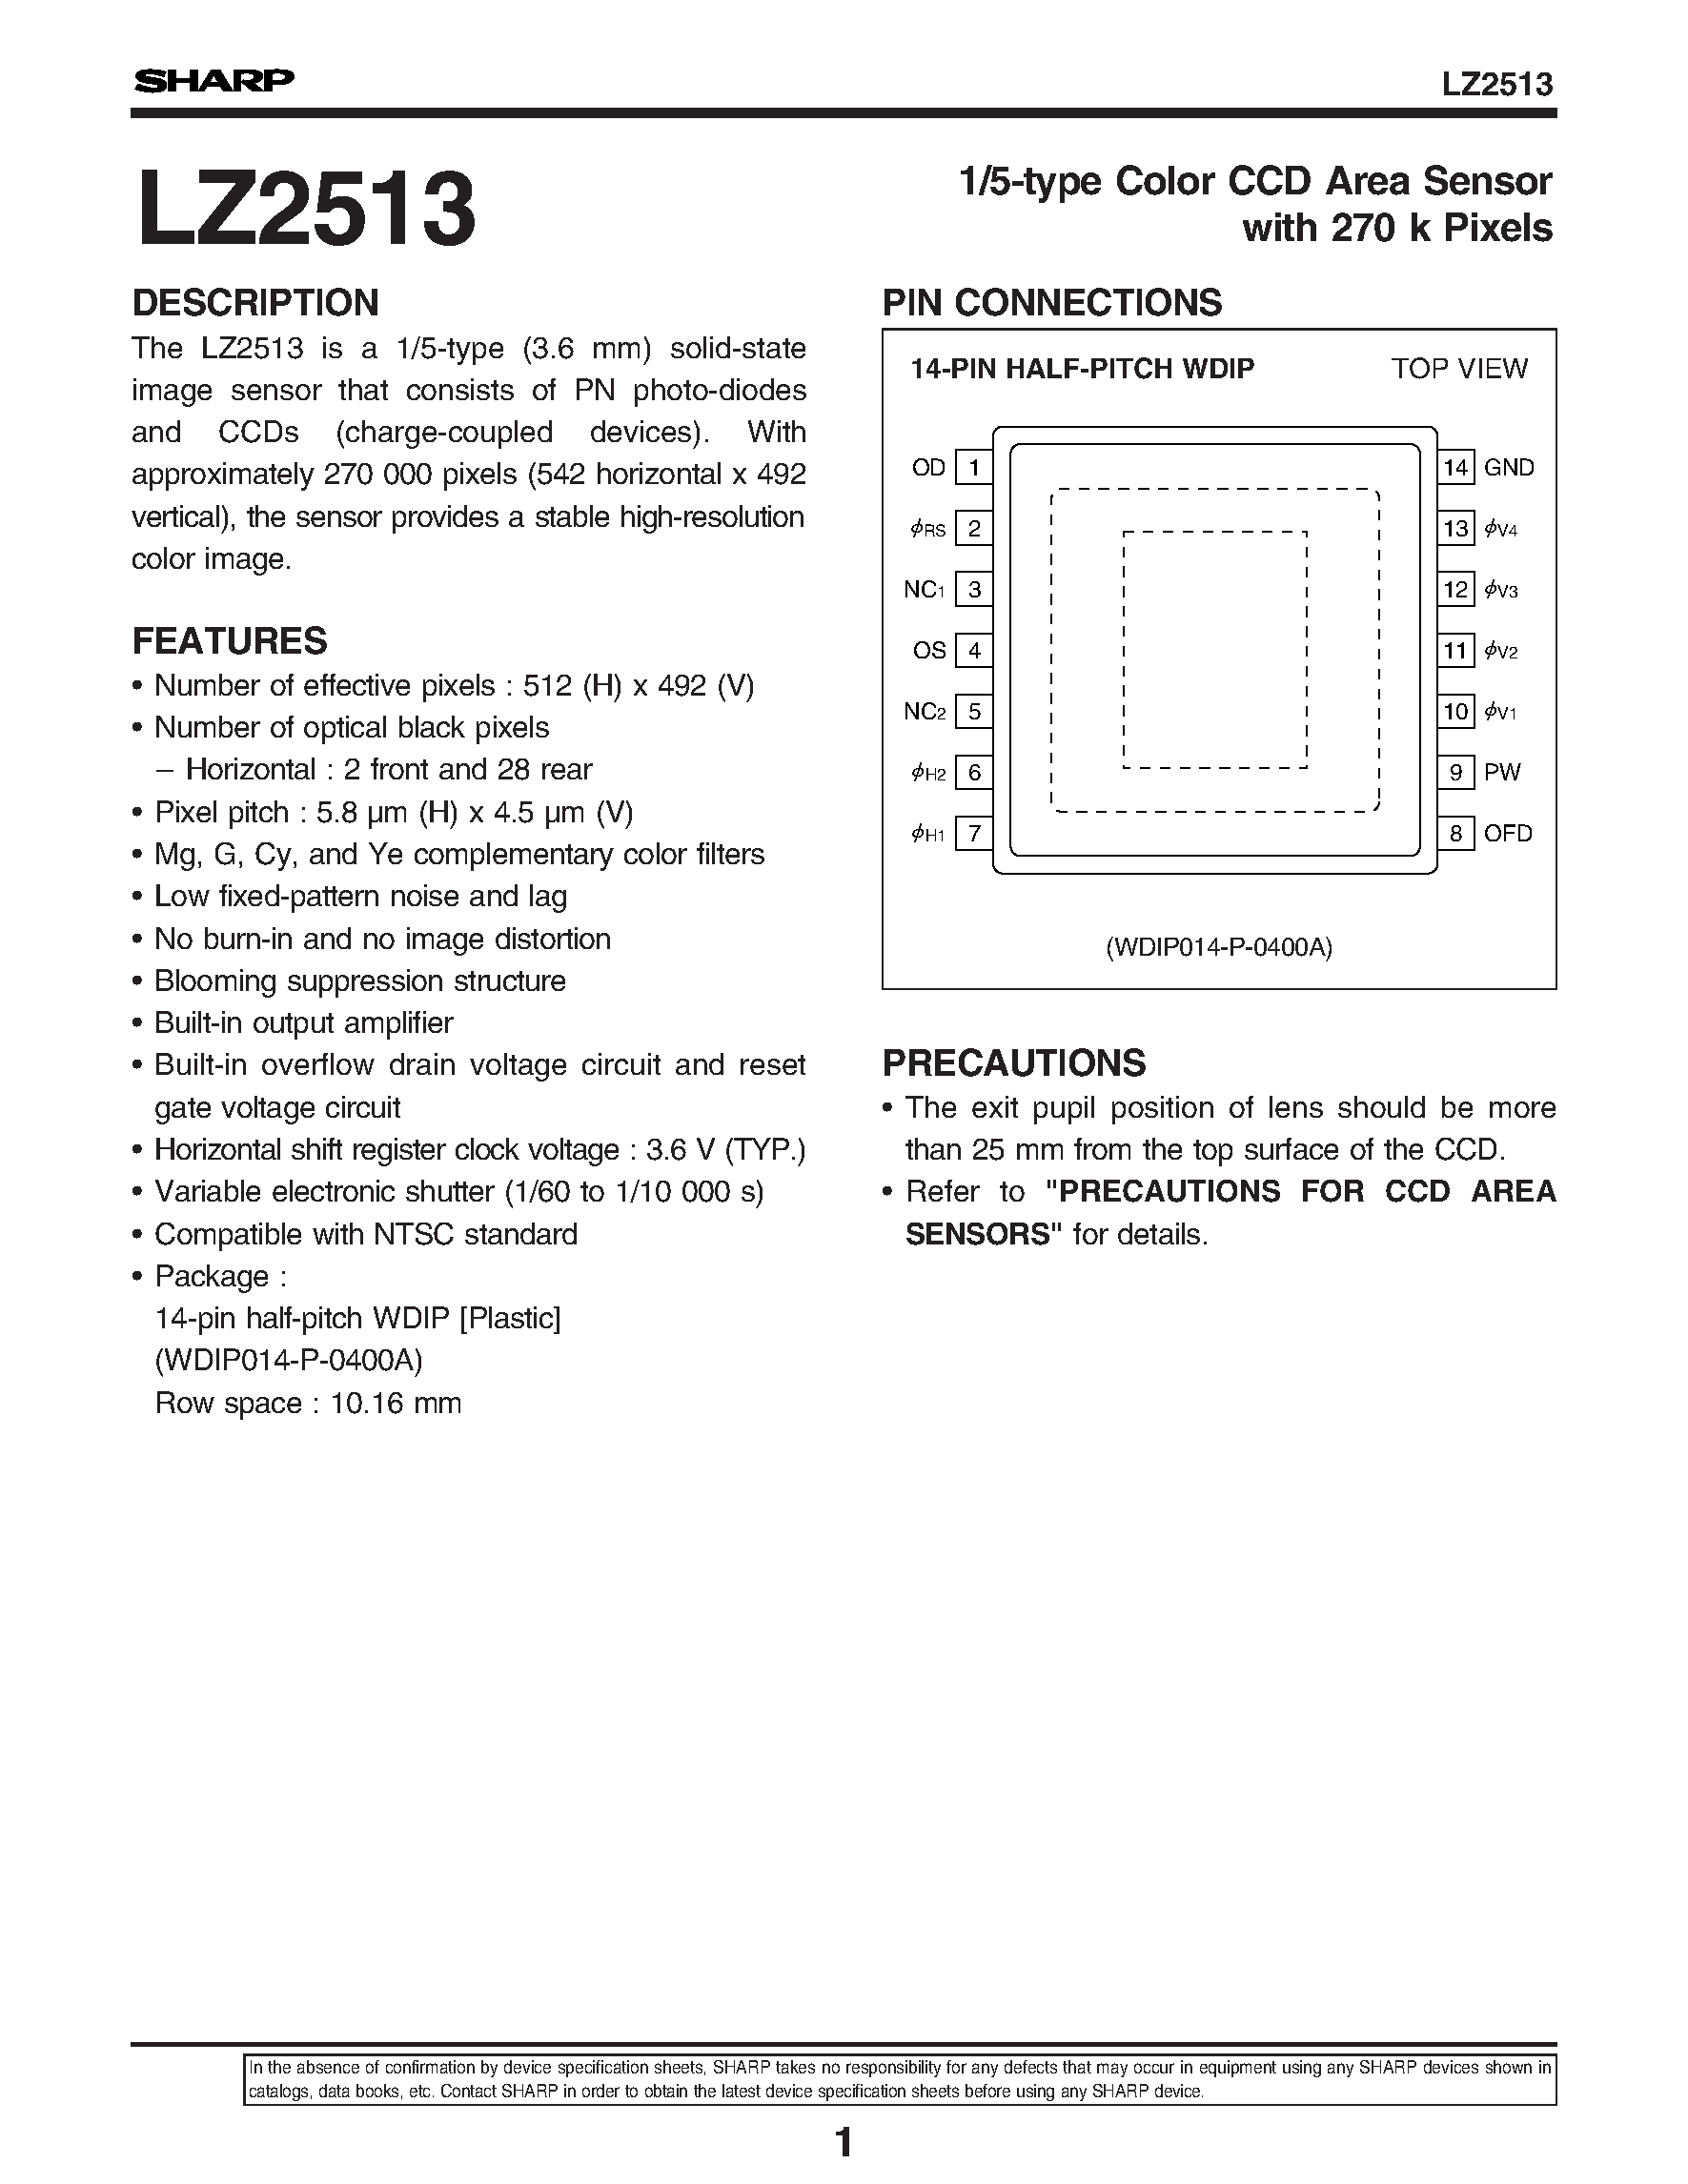 Datasheet LZ2513 - 1/5-type Color CCD Area Sensor with 270 k Pixels page 1